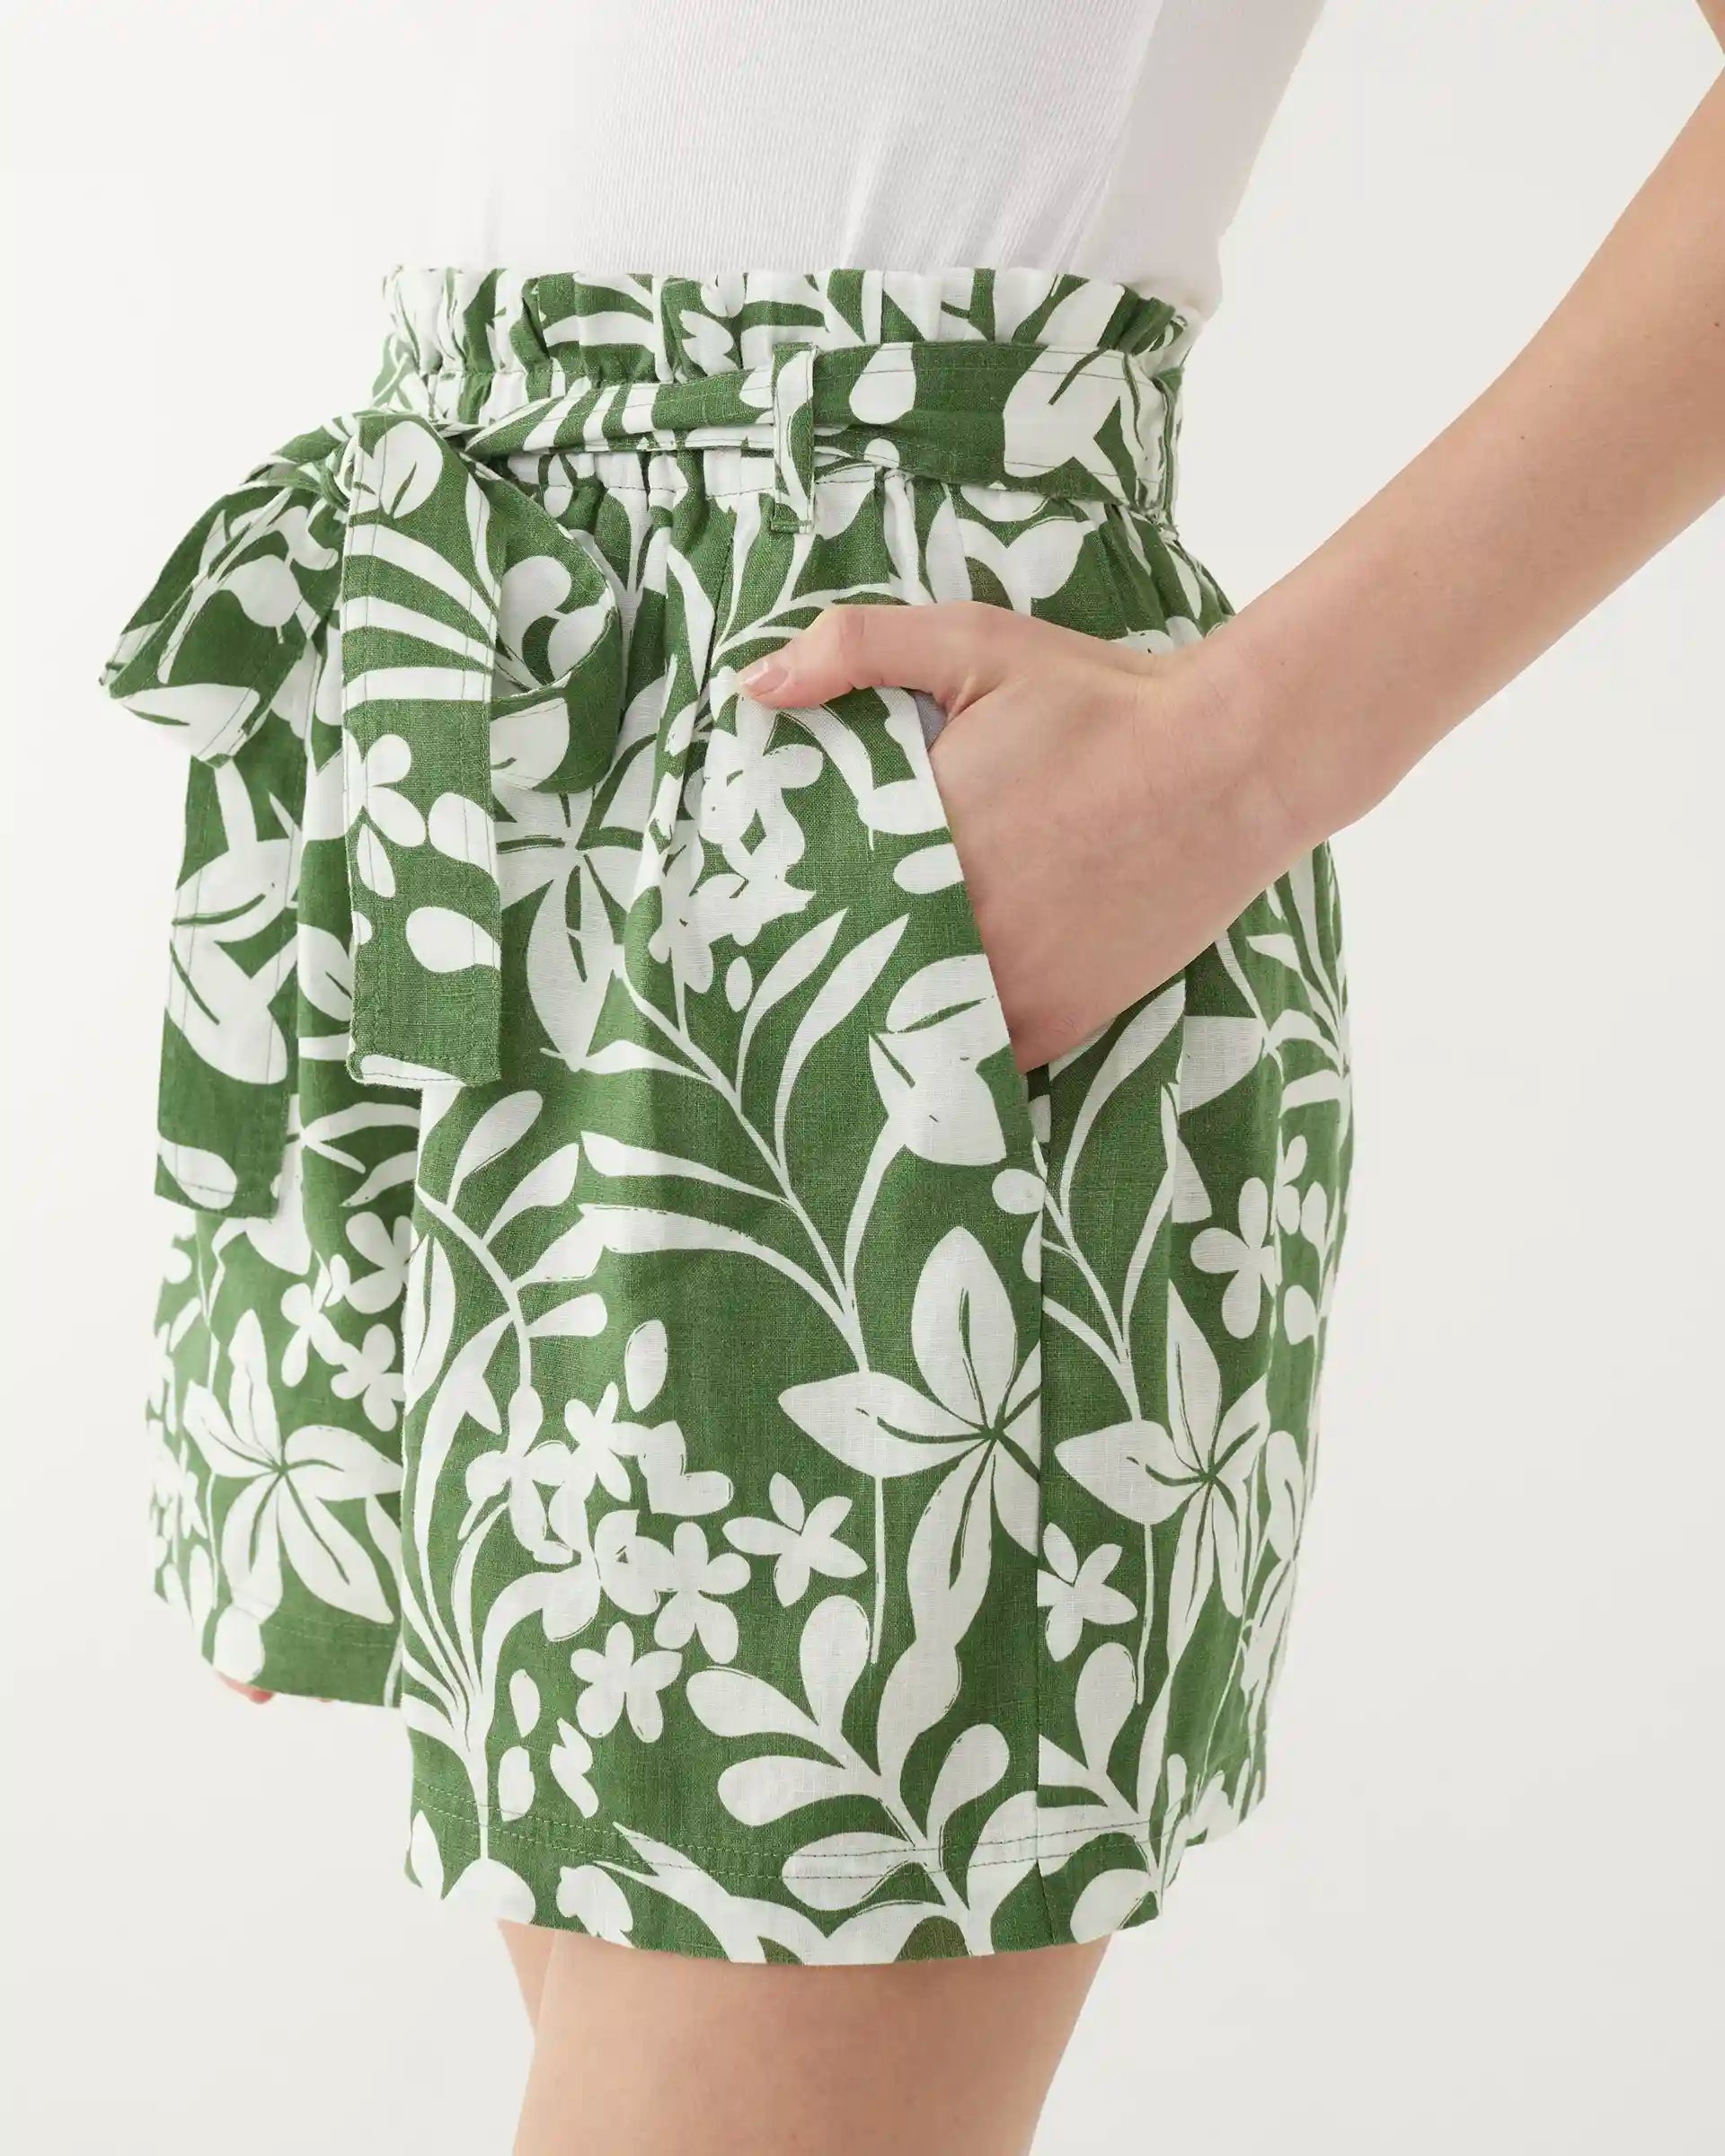 female wearing green shorts with white floral print and one hand in pocket on a white background